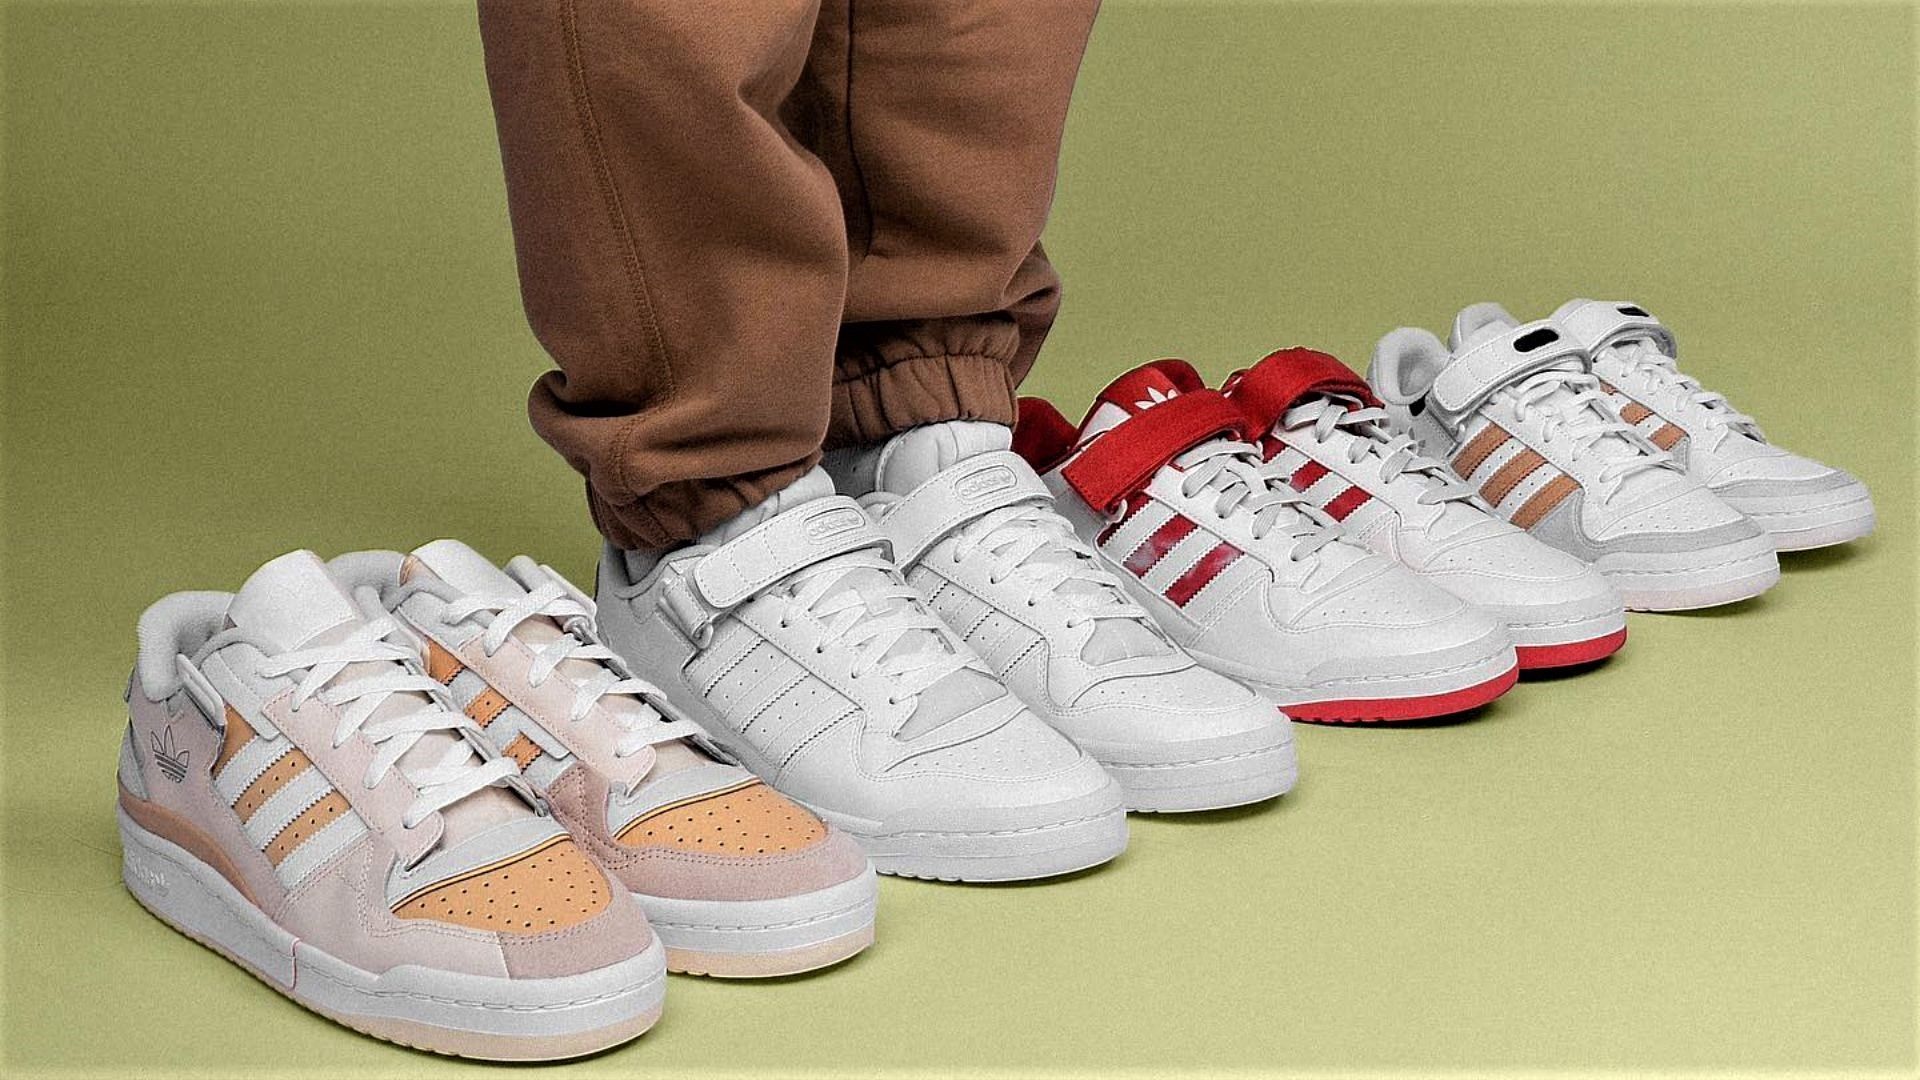 Retaliate opbevaring jage Classic Adidas Sneakers For Men To Collect Now